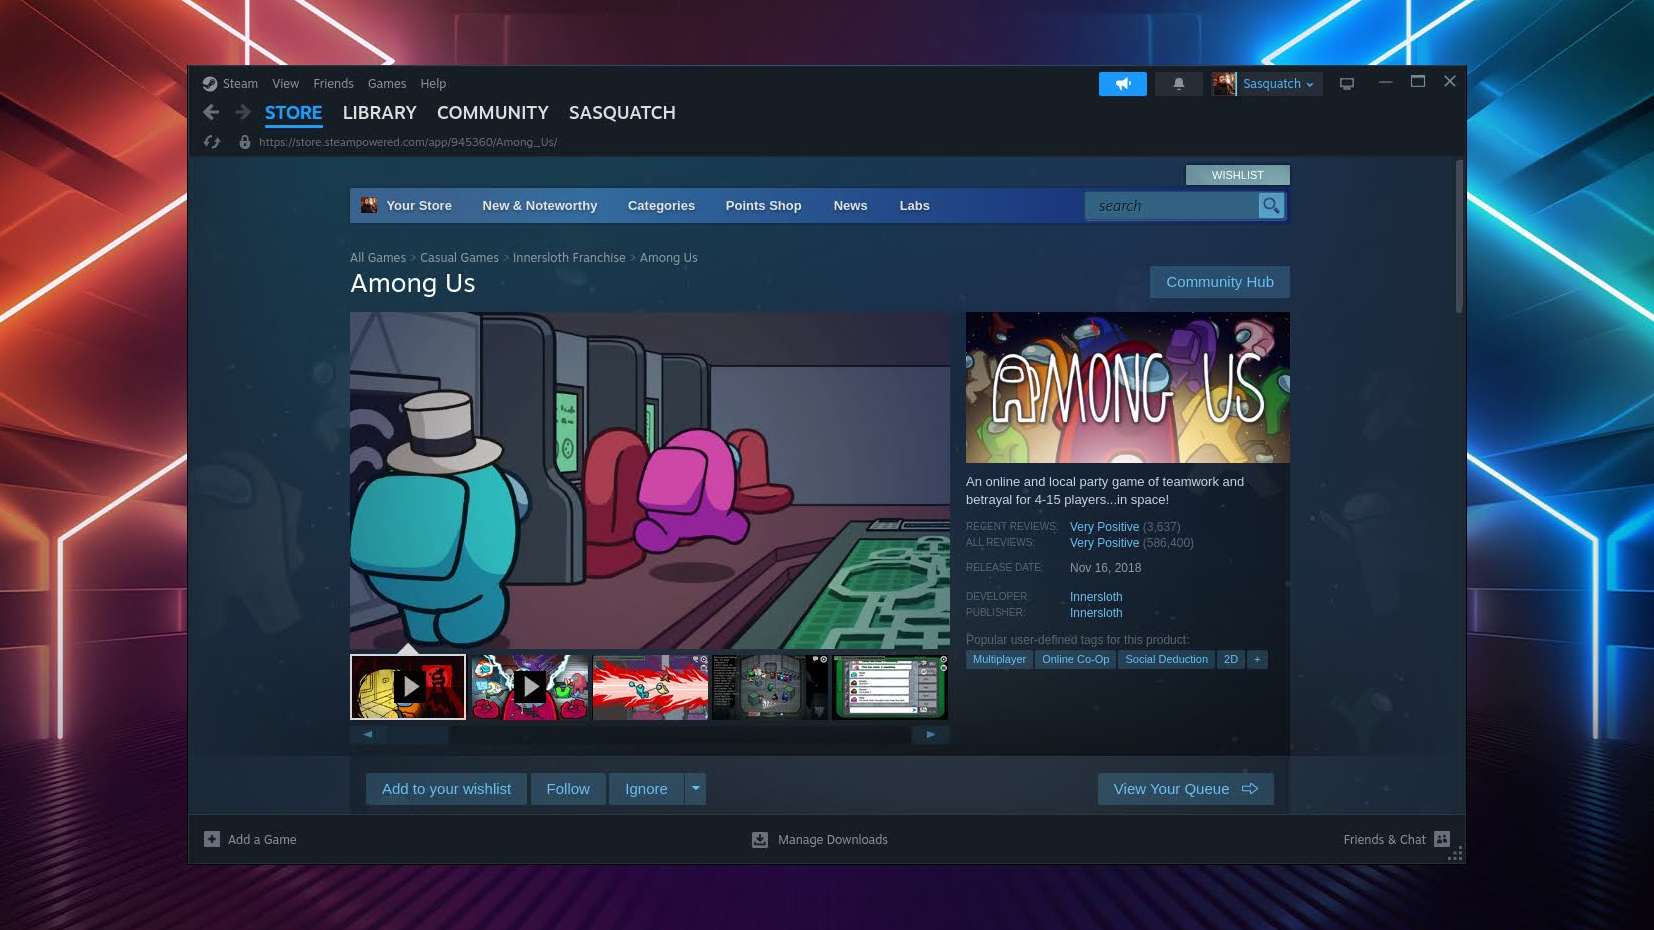 Download Among Us from Steam app on Chromebook 4